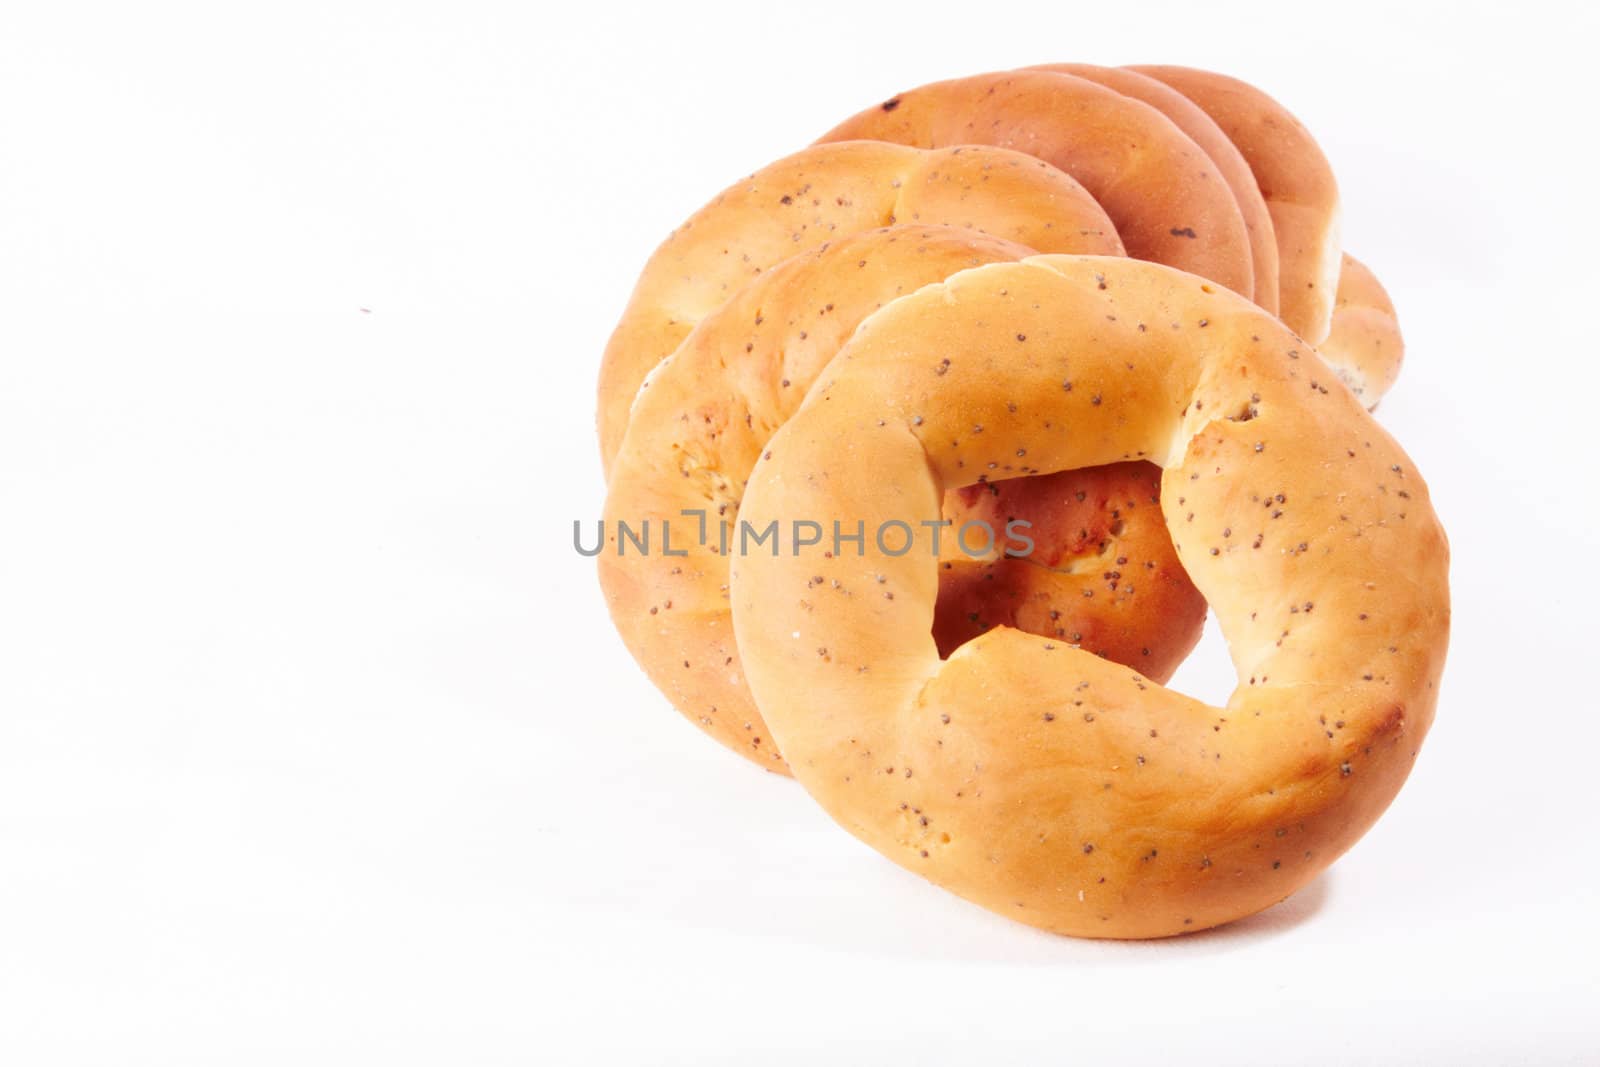 russian boublik - bread of the circular shape over white